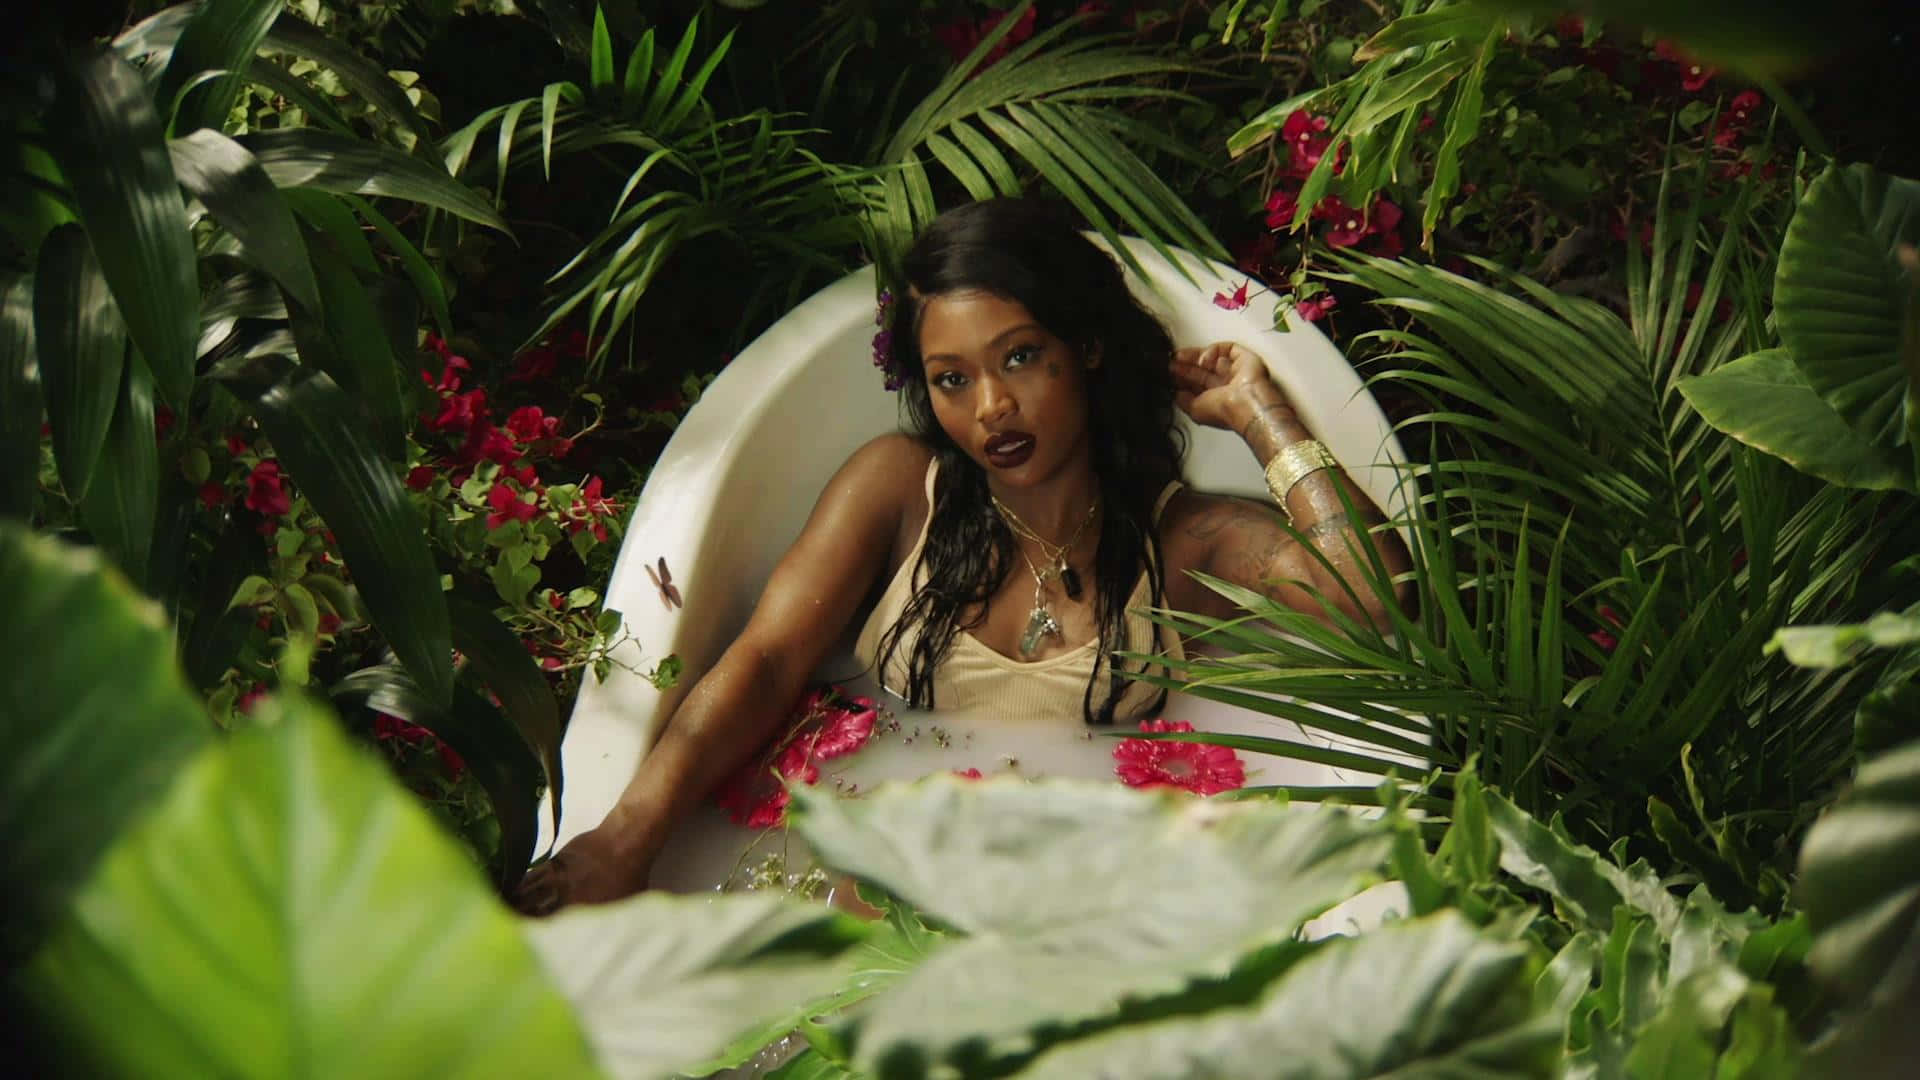 A Woman In A Tub Surrounded By Plants